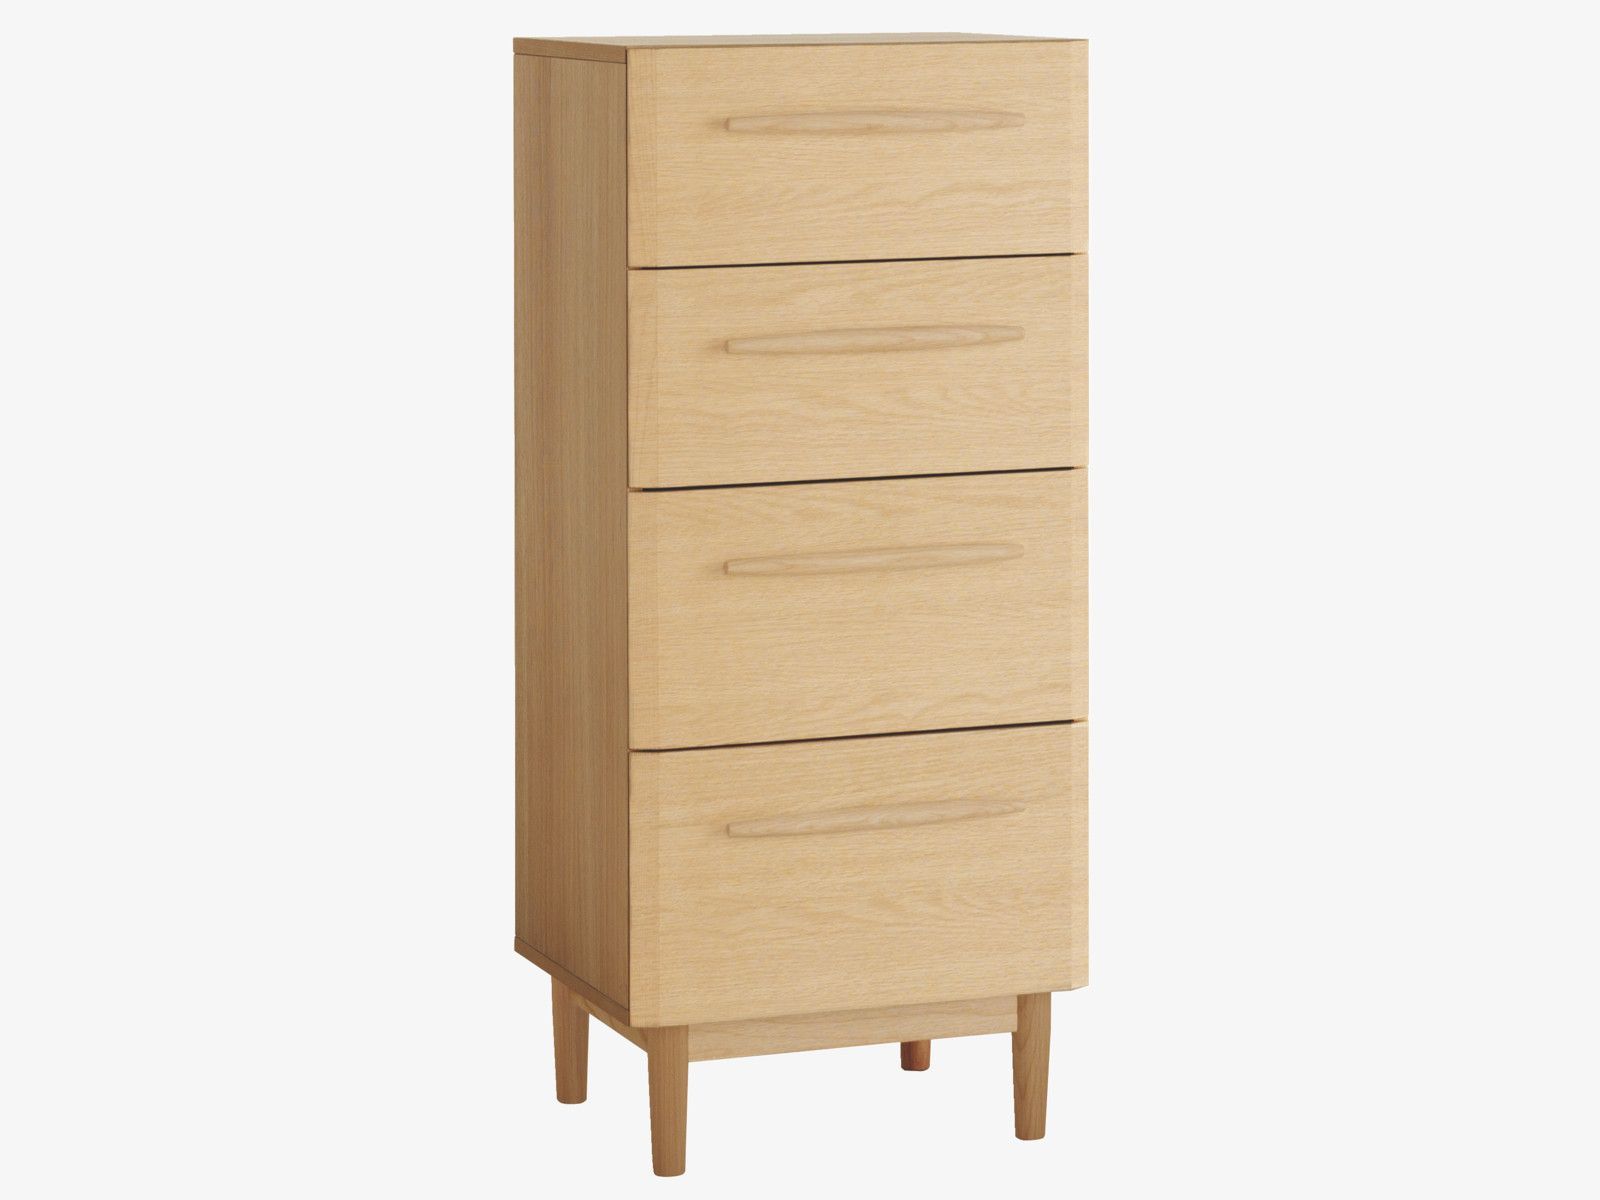 Aggy Natural Wood Oak 4 Drawer Tall Chest – Bedroom Furniture Throughout Natural Peroba 4 Drawer Wood Desks (View 14 of 15)